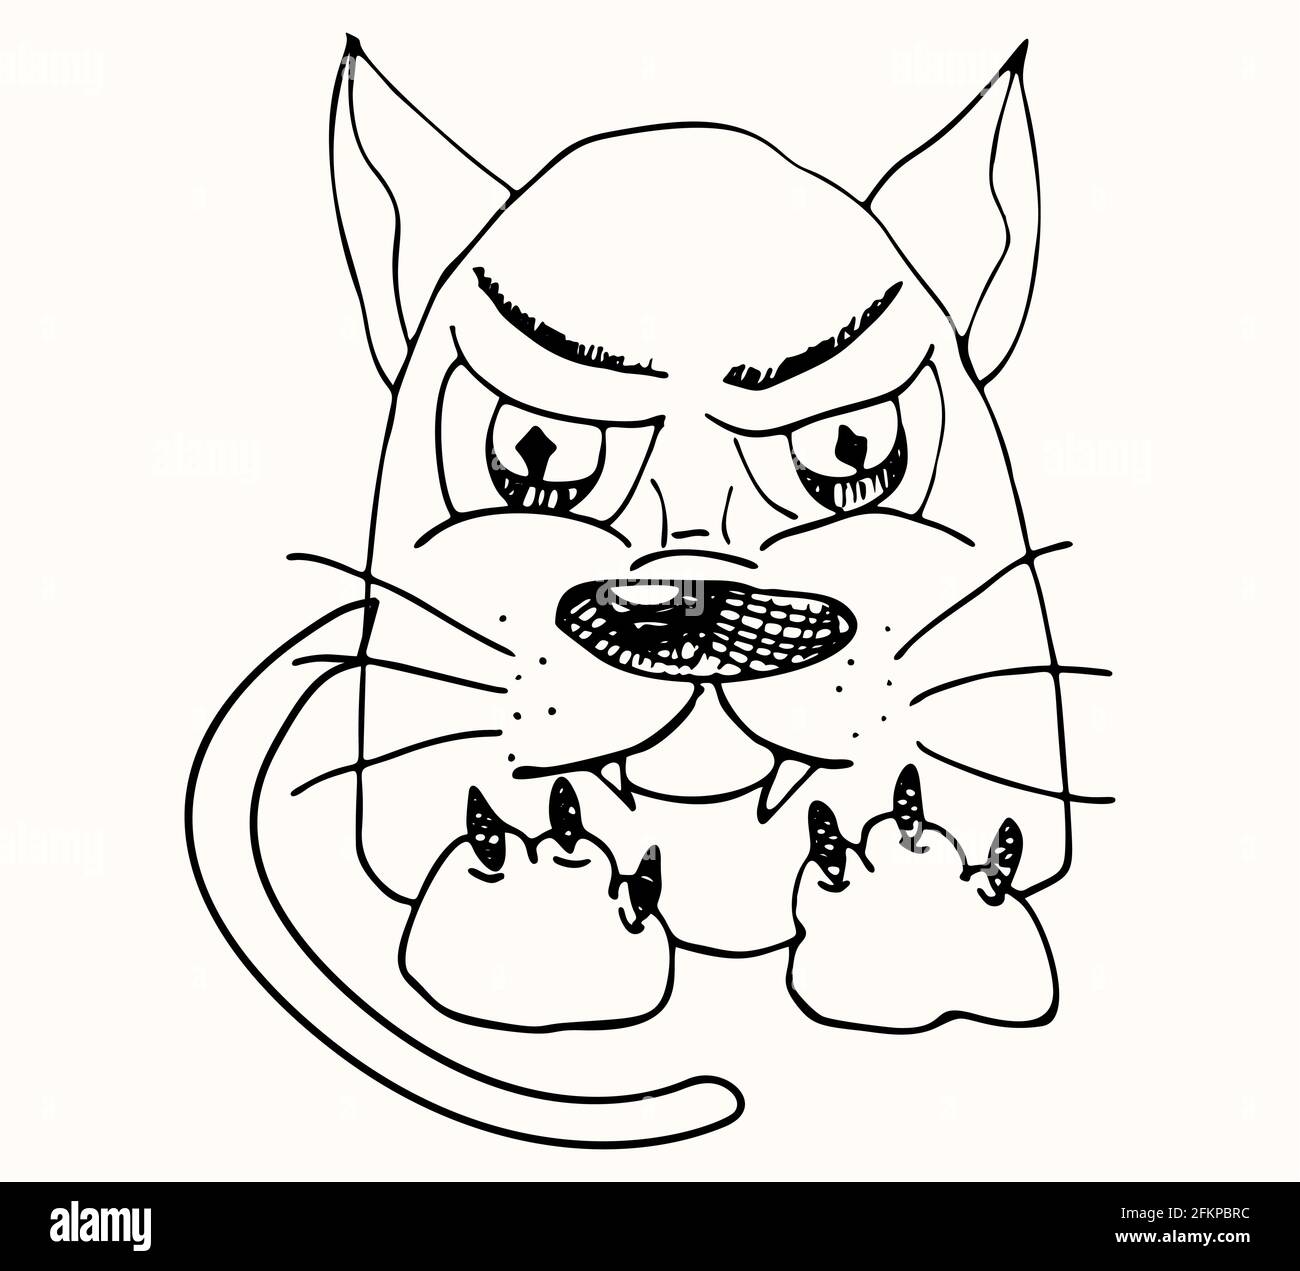 19,894 Angry Cat Draw Images, Stock Photos, 3D objects, & Vectors